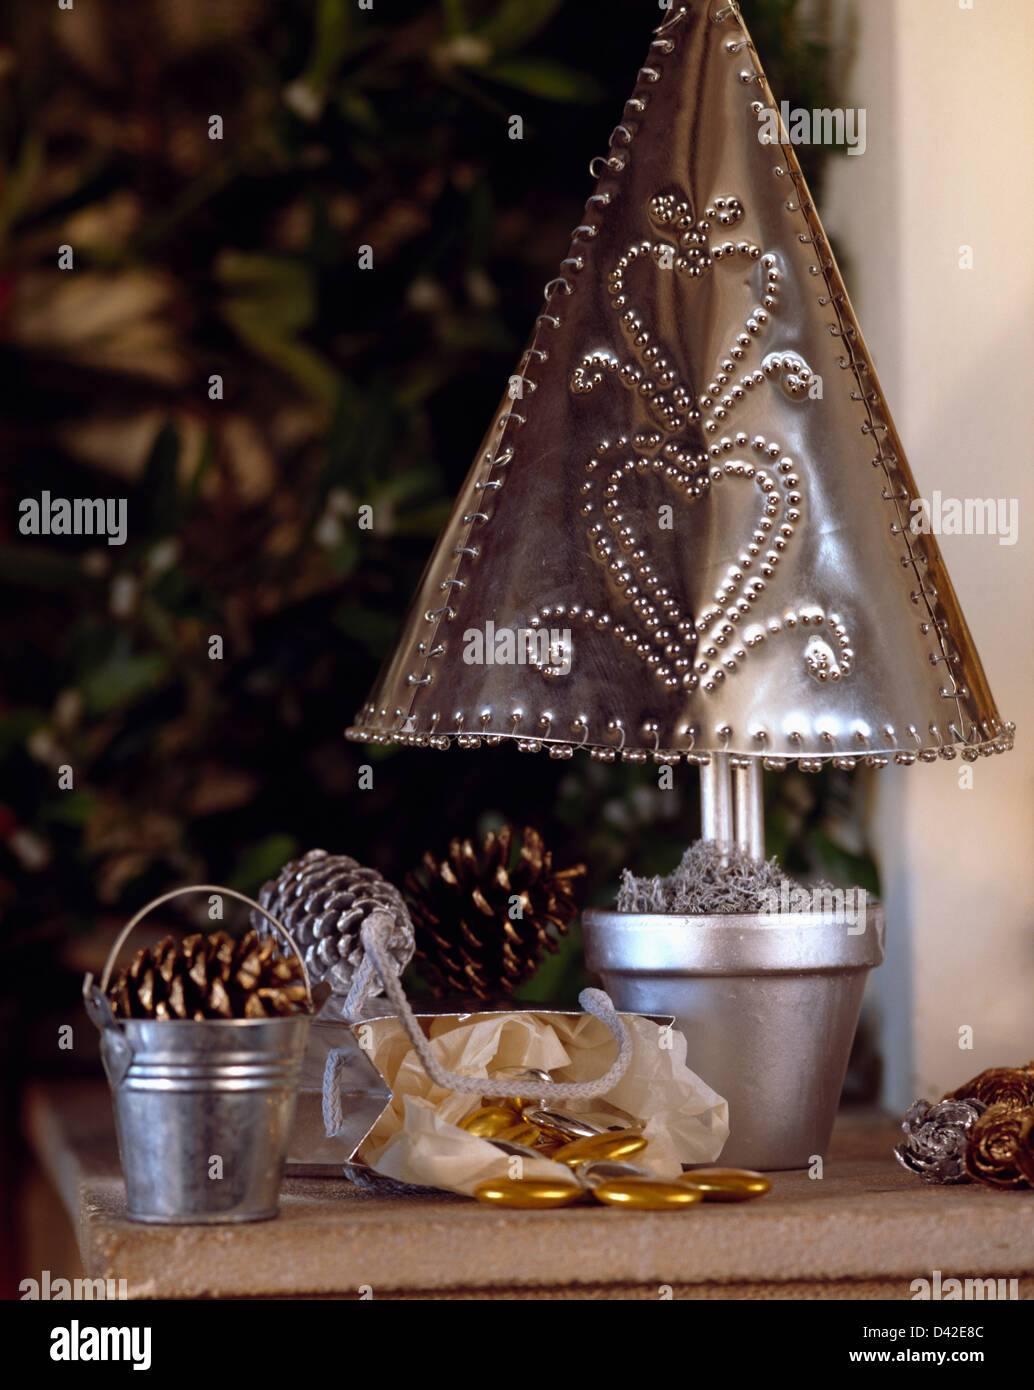 Close-up of hand-made punched tin Christmas tree in silver painted pot on table with miniature zinc buckets with pine cones Stock Photo